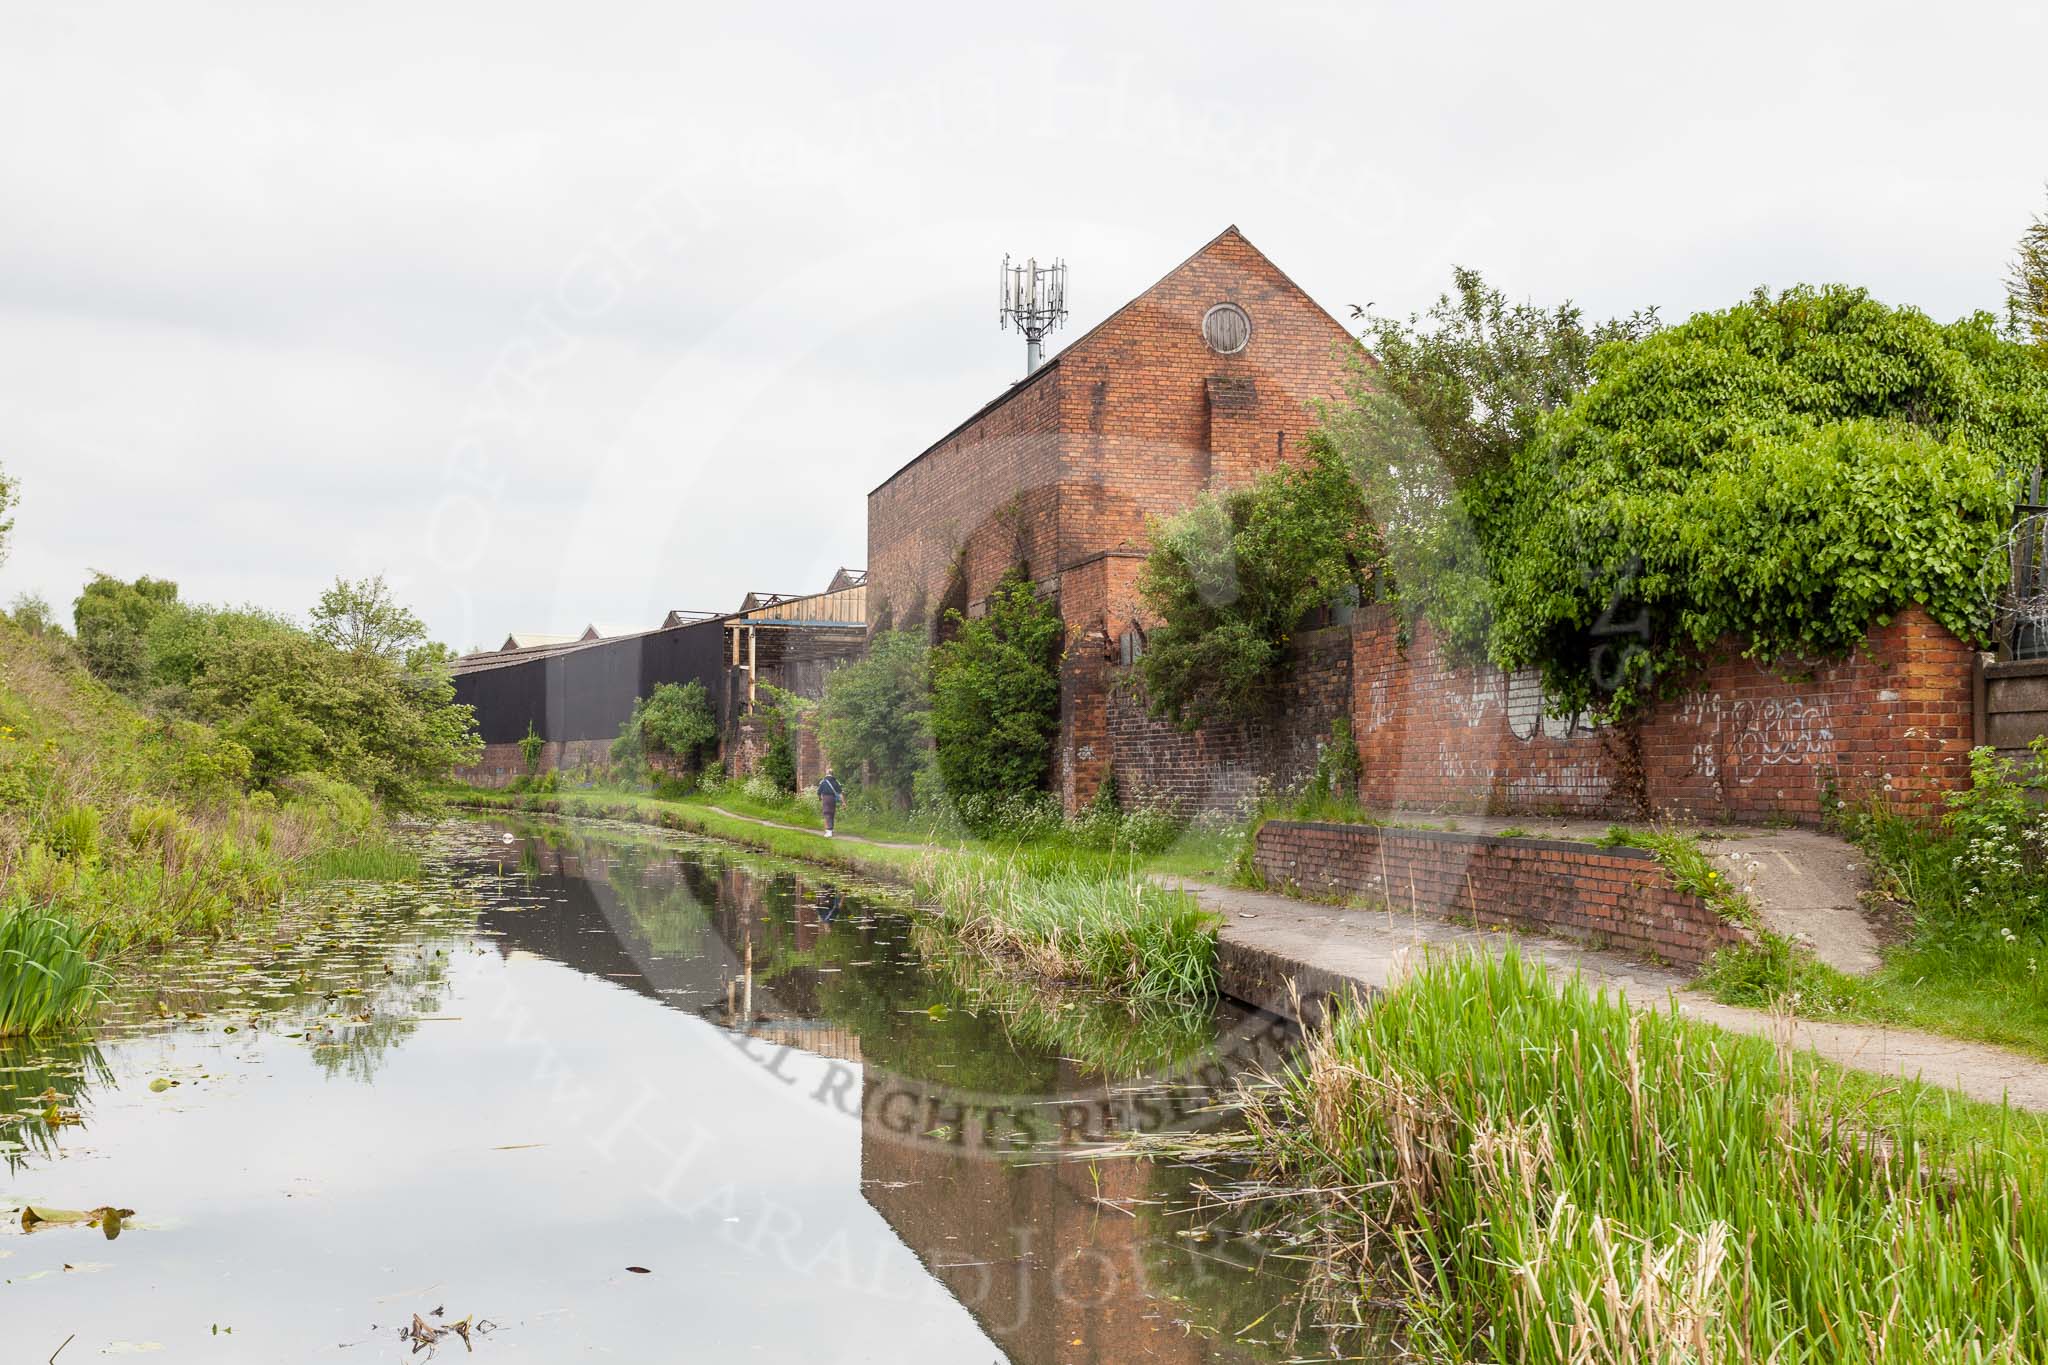 BCN 24h Marathon Challenge 2015: The site of Darlaston Iron and Steel Works next to the Walsall Canal.
Birmingham Canal Navigations,



on 23 May 2015 at 16:36, image #135